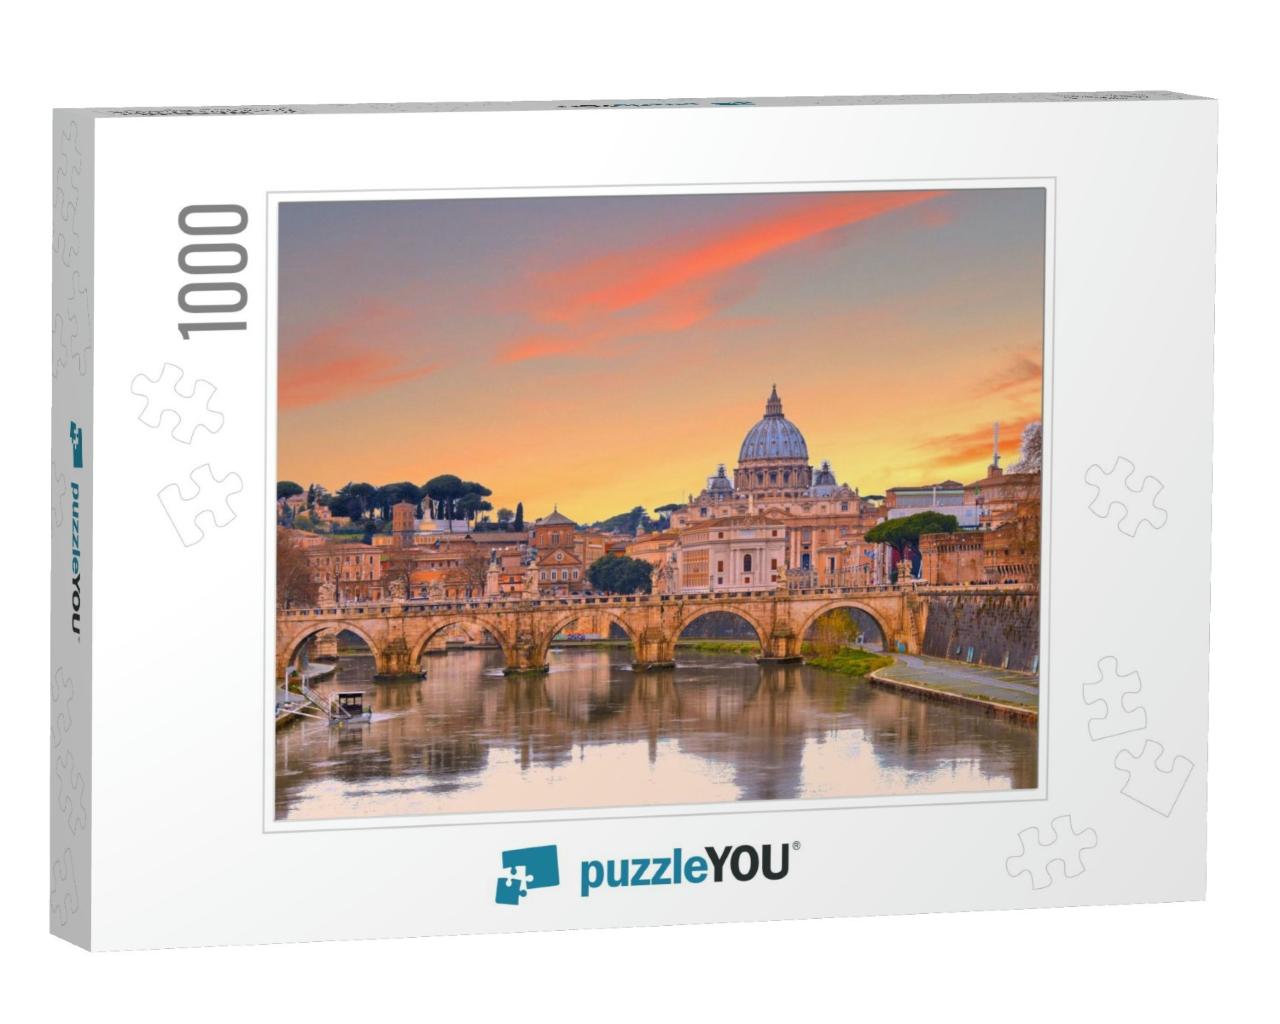 Cityscape & Panoramic View of Old Bridge with Warm Sunset... Jigsaw Puzzle with 1000 pieces